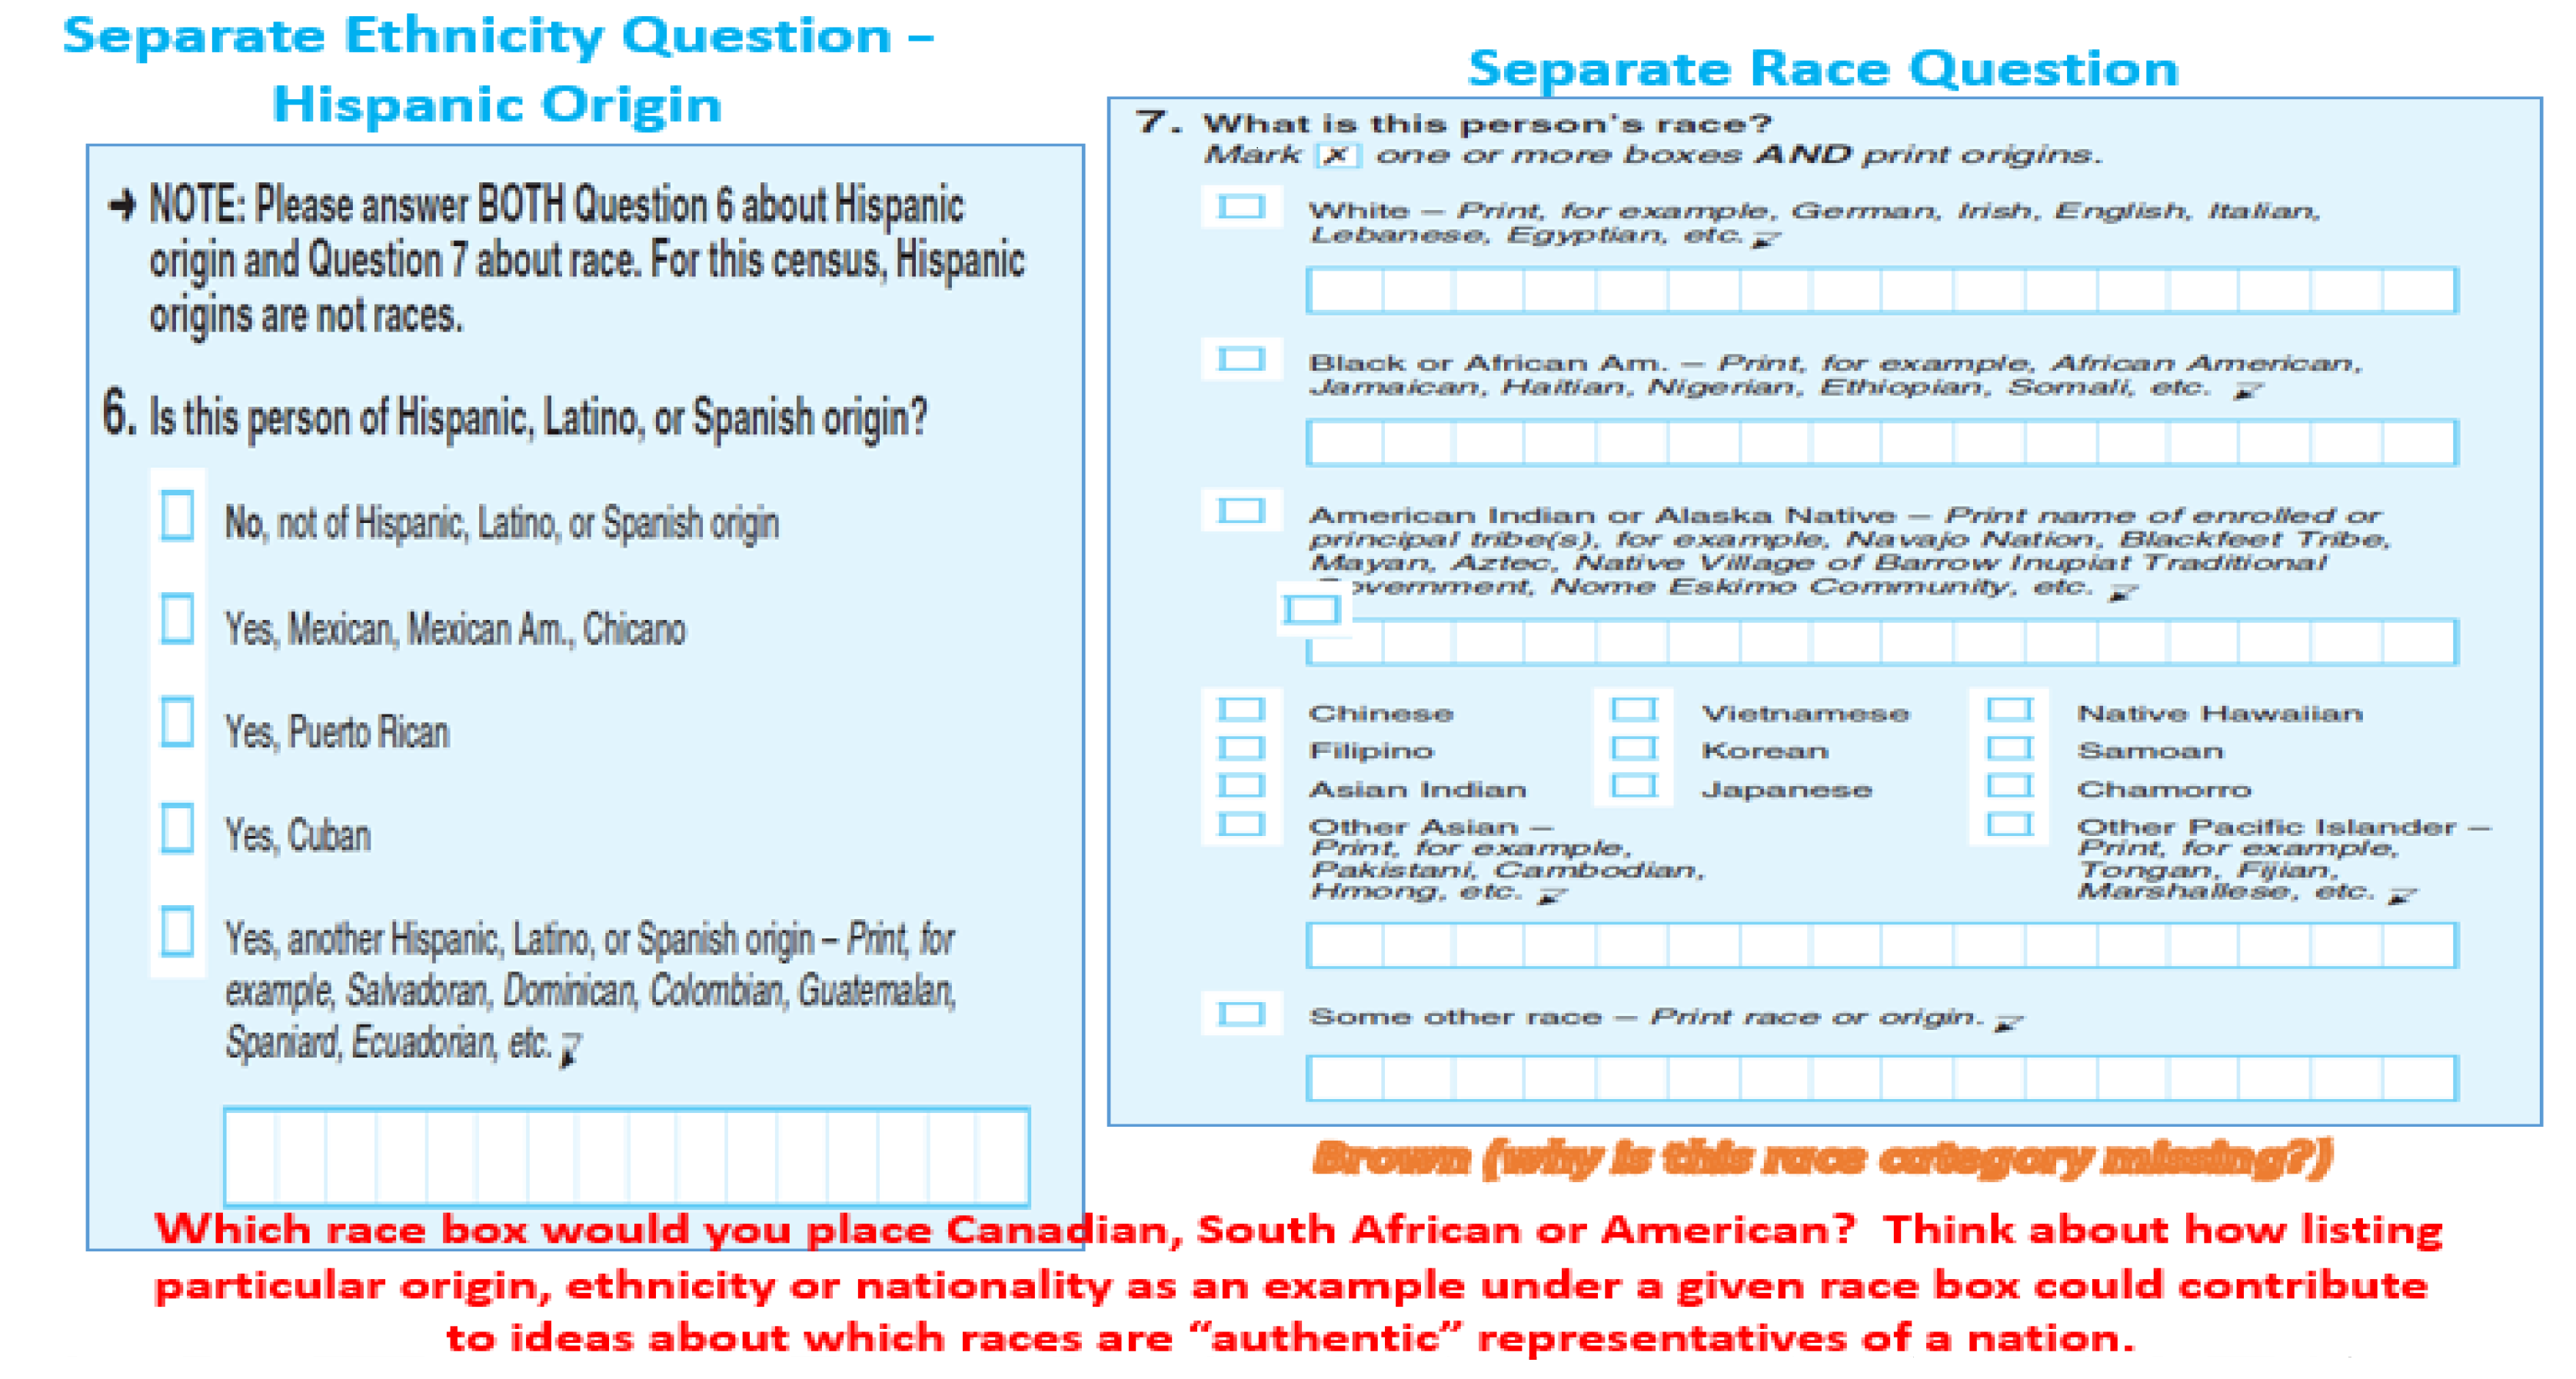 Improvements to the 2020 Census Race and Hispanic Origin Question